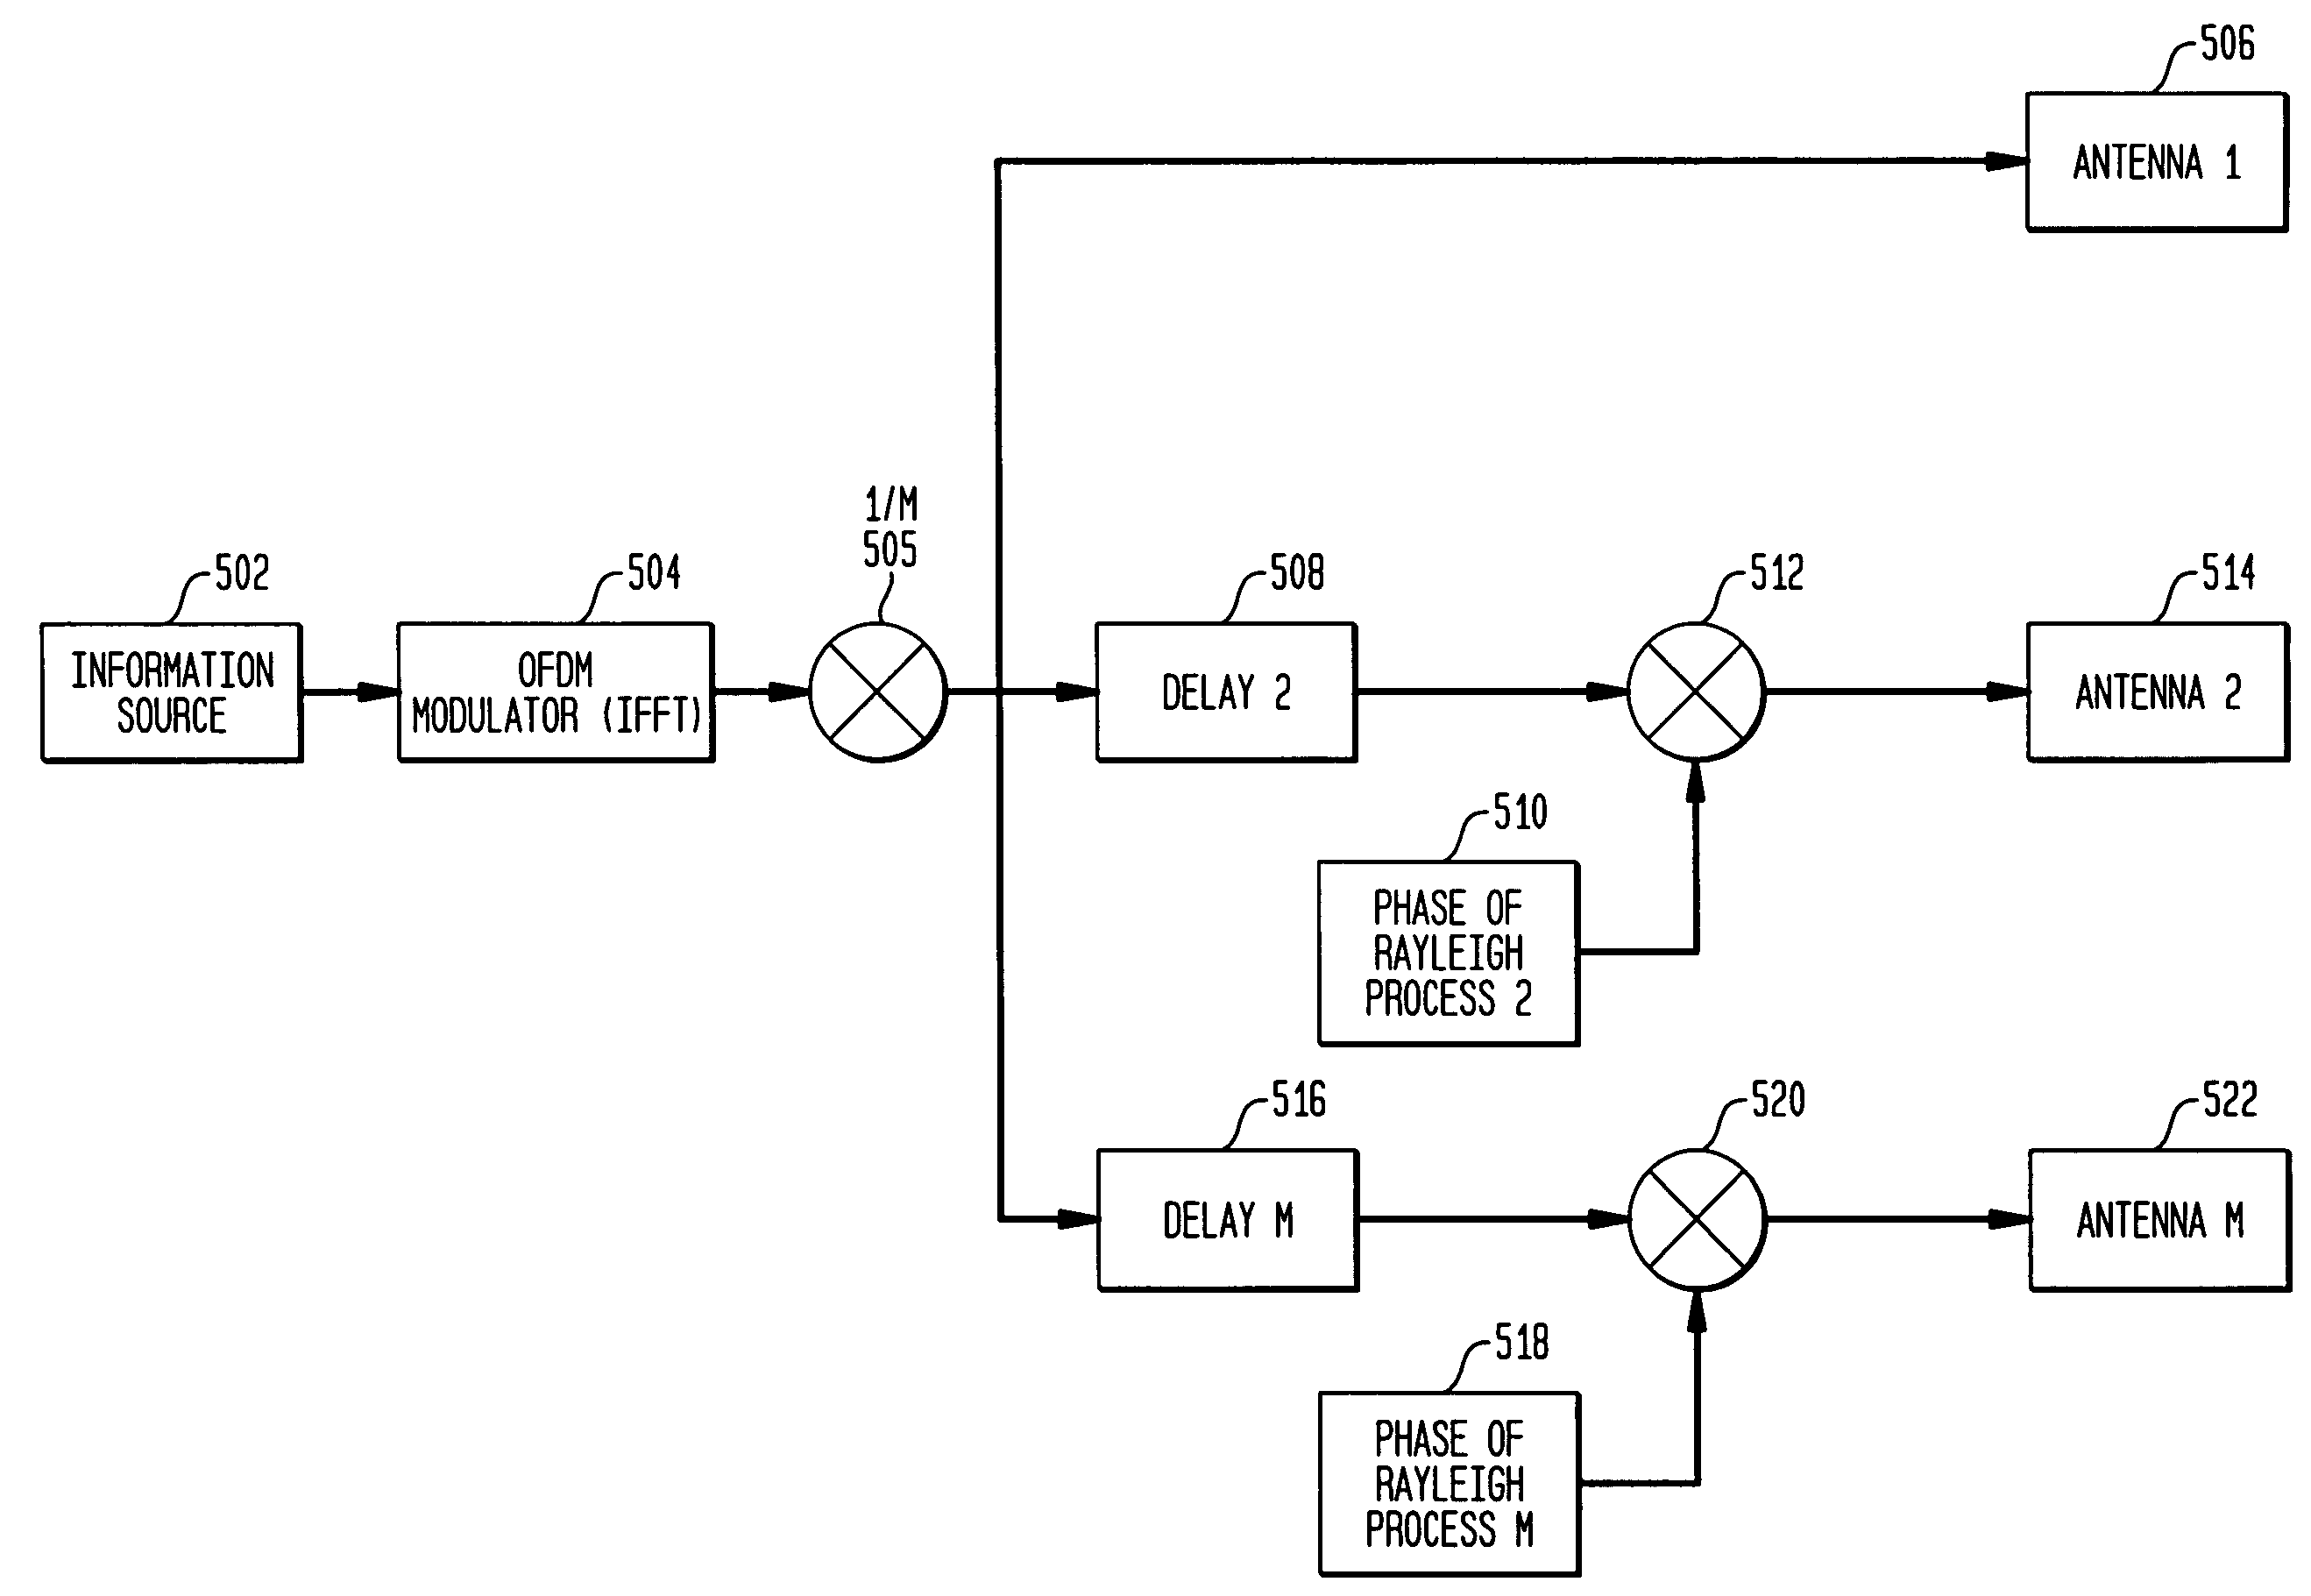 Dithering scheme using multiple antennas for OFDM systems